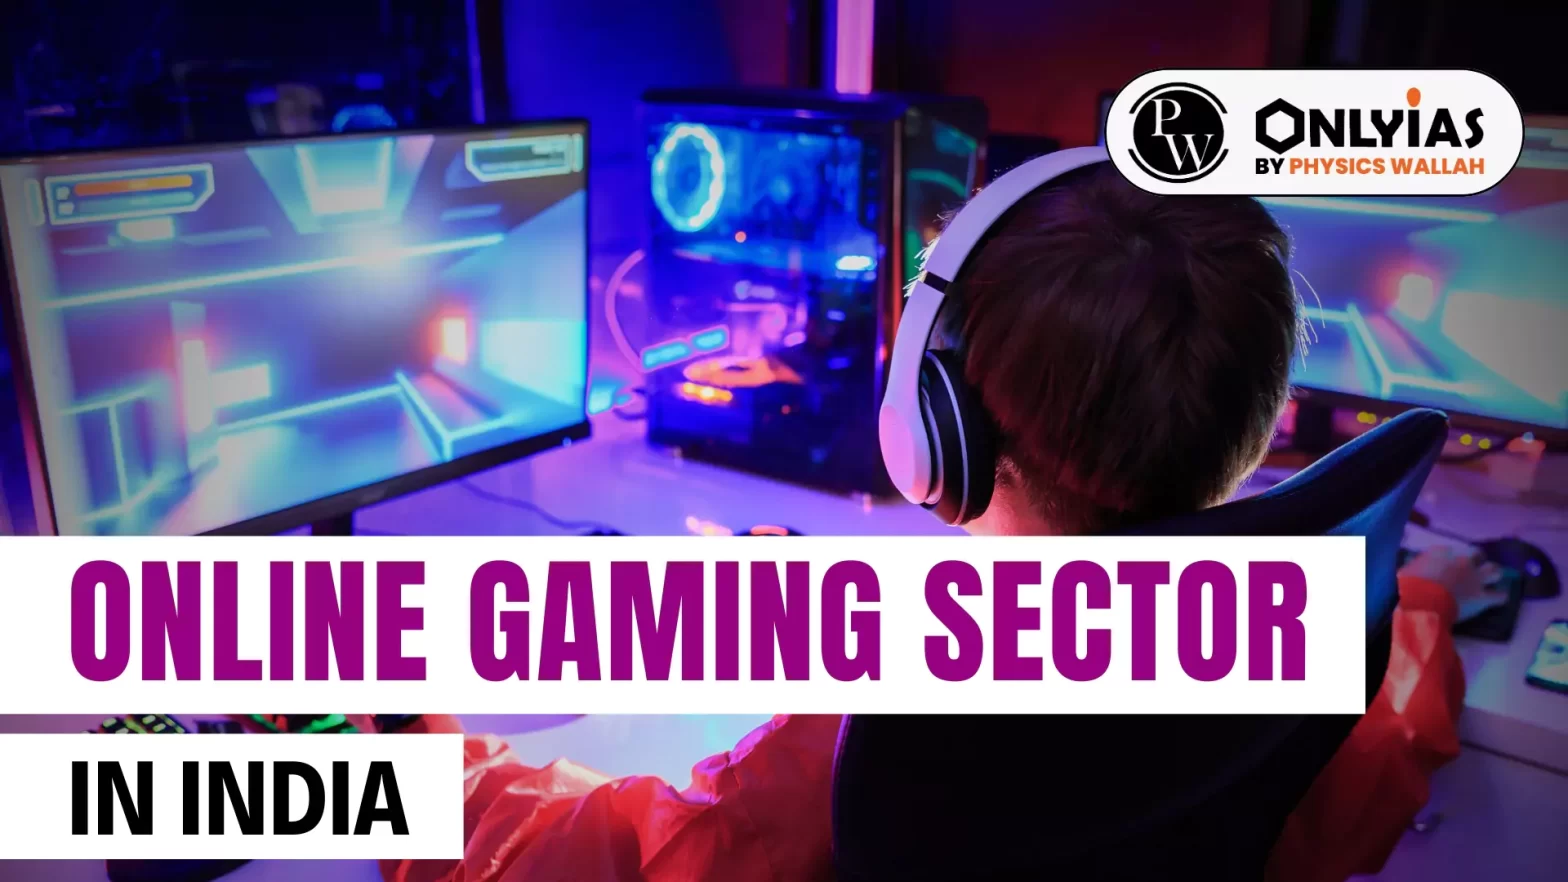 Online Gaming Sector in India